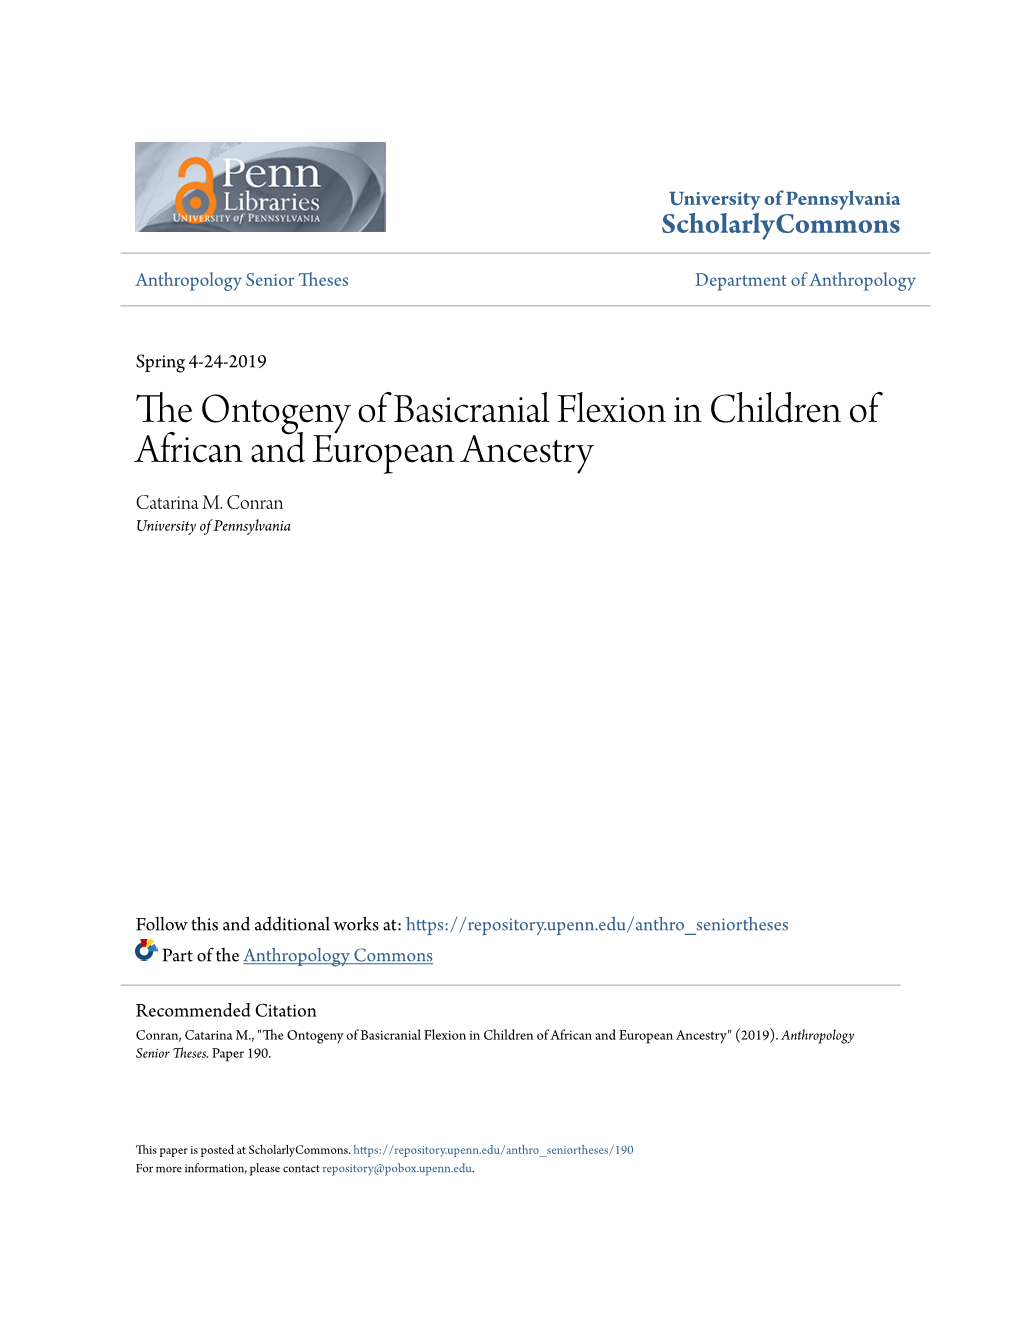 The Ontogeny of Basicranial Flexion in Children of African and European Ancestry Catarina M